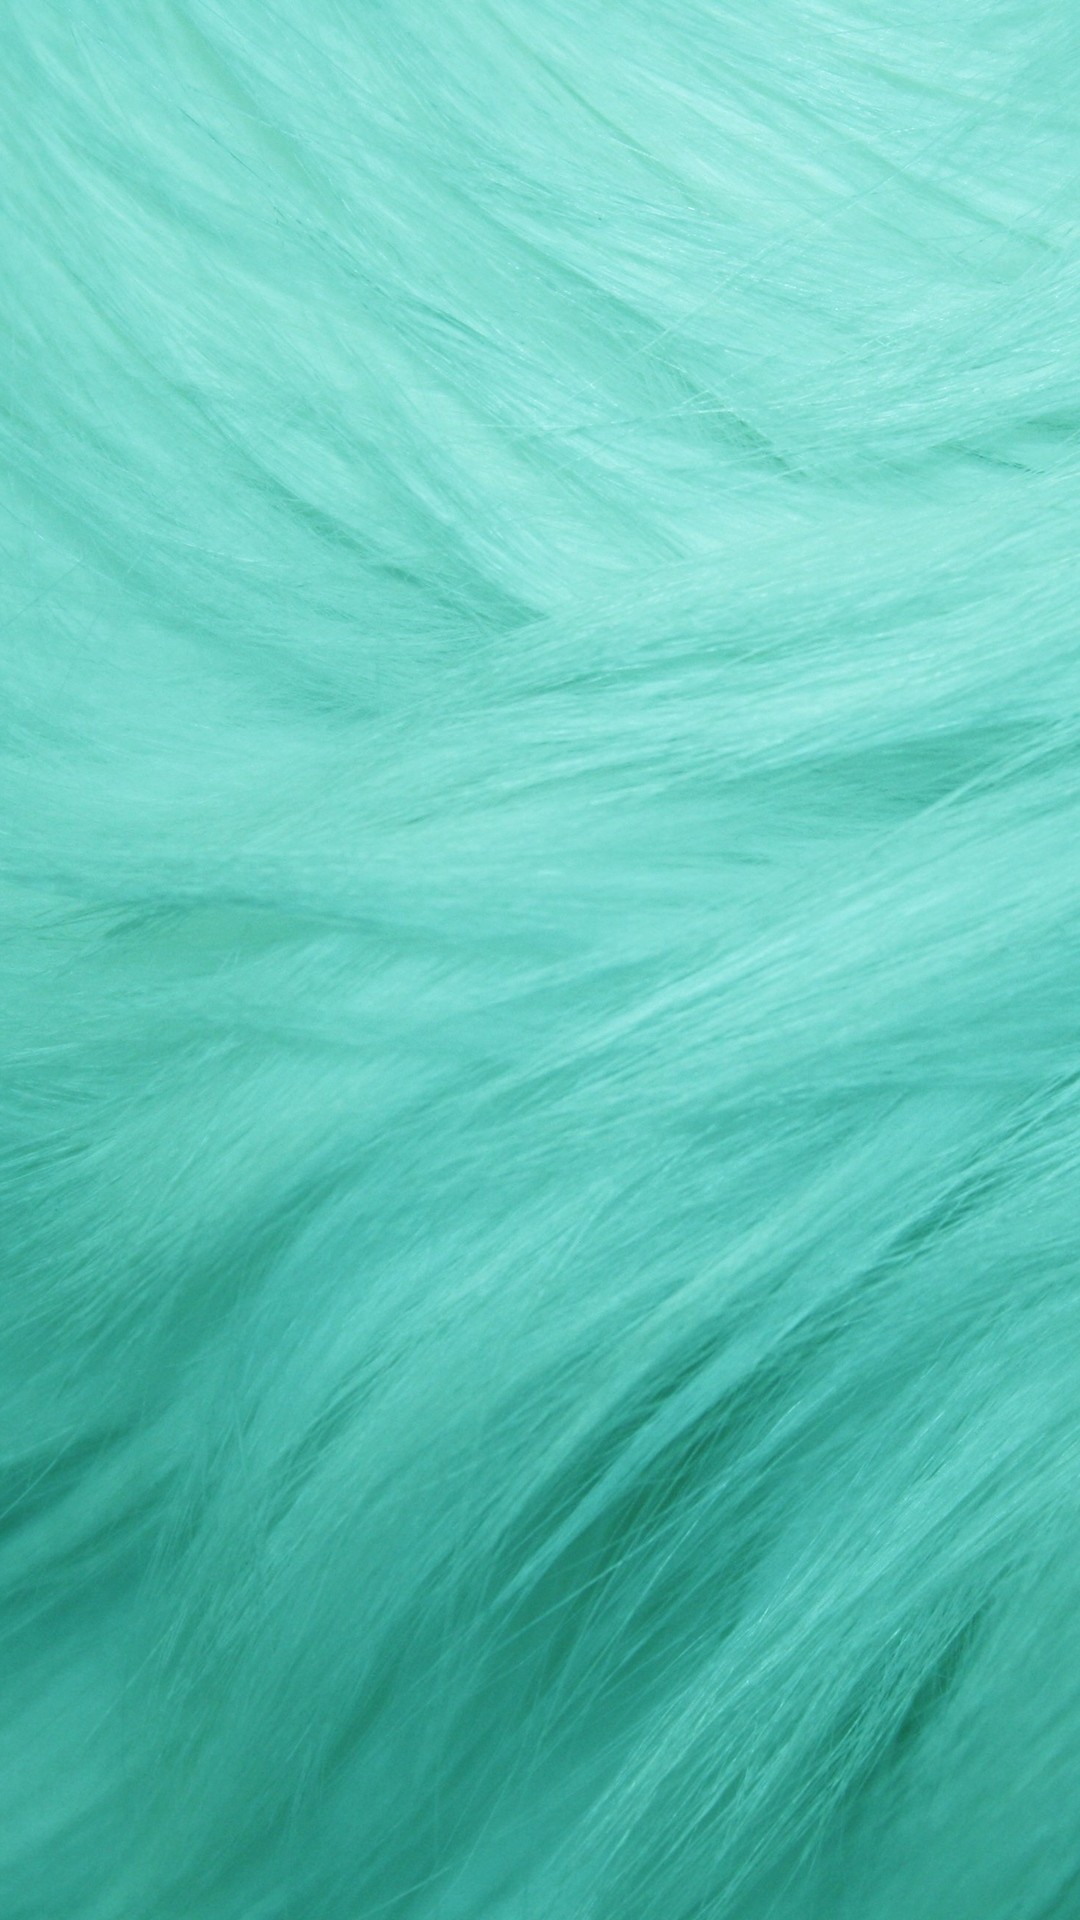 1080x1920 Teal Fur Texture - Tap to see more fluffy wallpapers! - @mobile9